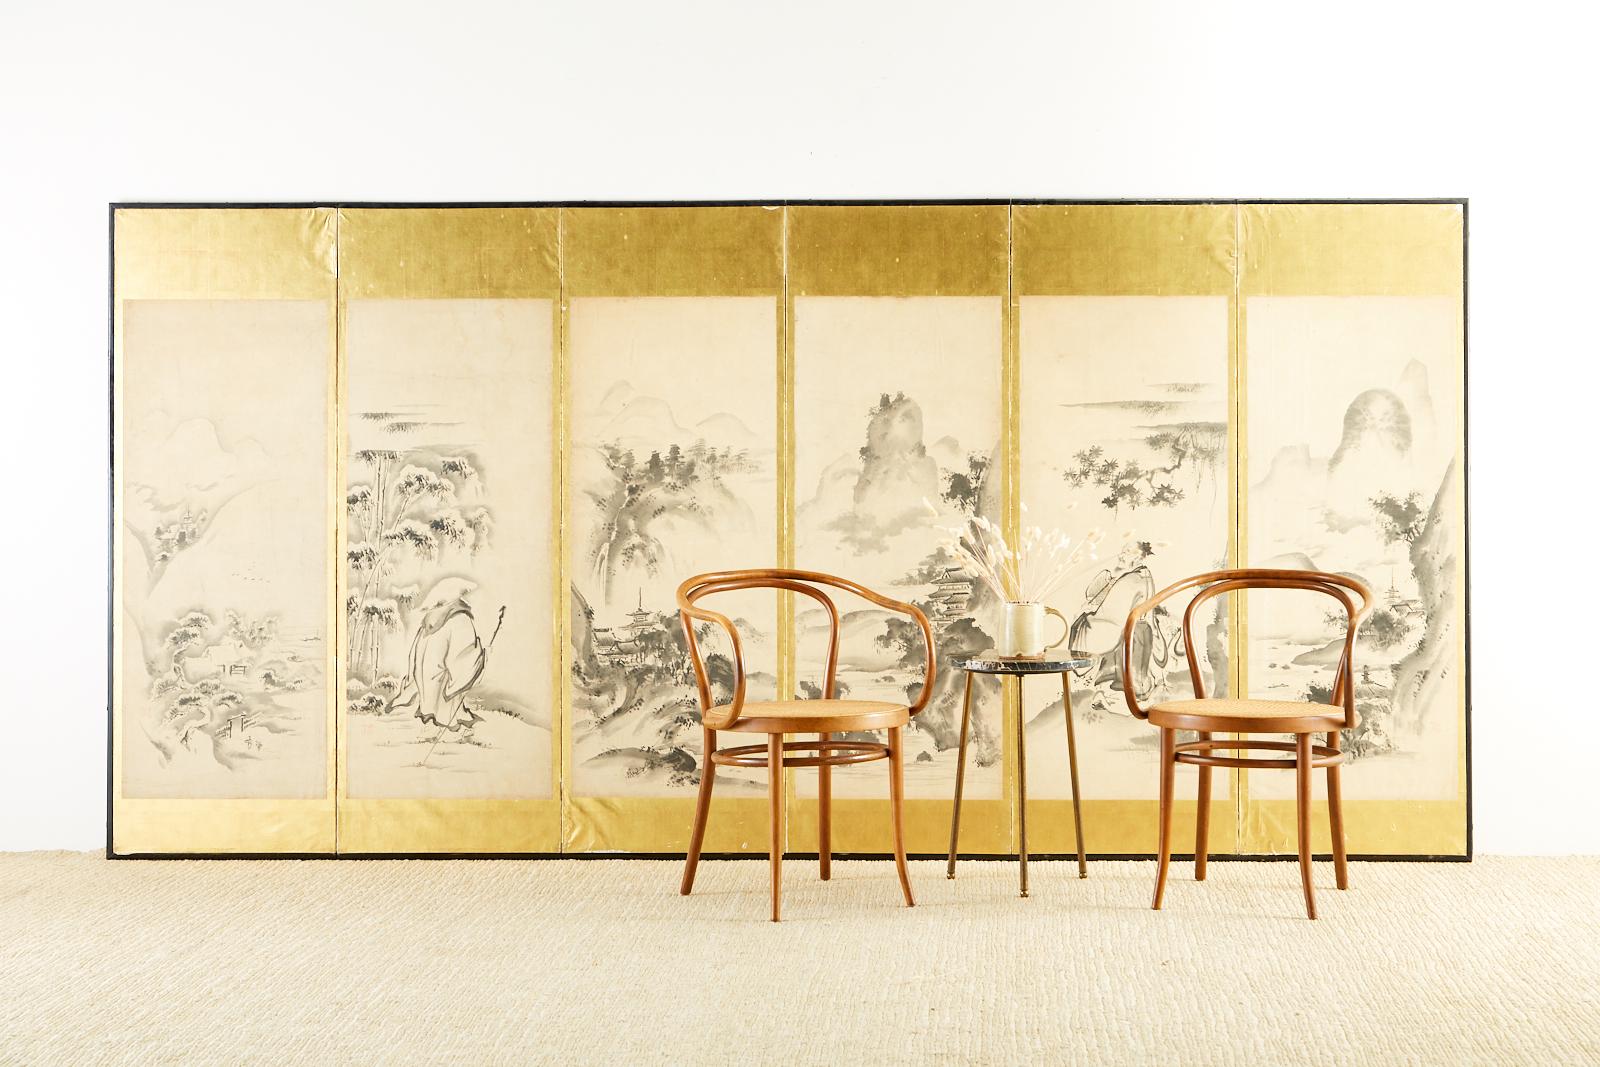 19th century Japanese Edo period six-panel screen painted in Haboku (splashed ink) style. Depicts Four Seasons landscape scenes with two portraits of Chinese sages. One sage is traveling in the snow, the other is with a crane. Kano school ink on